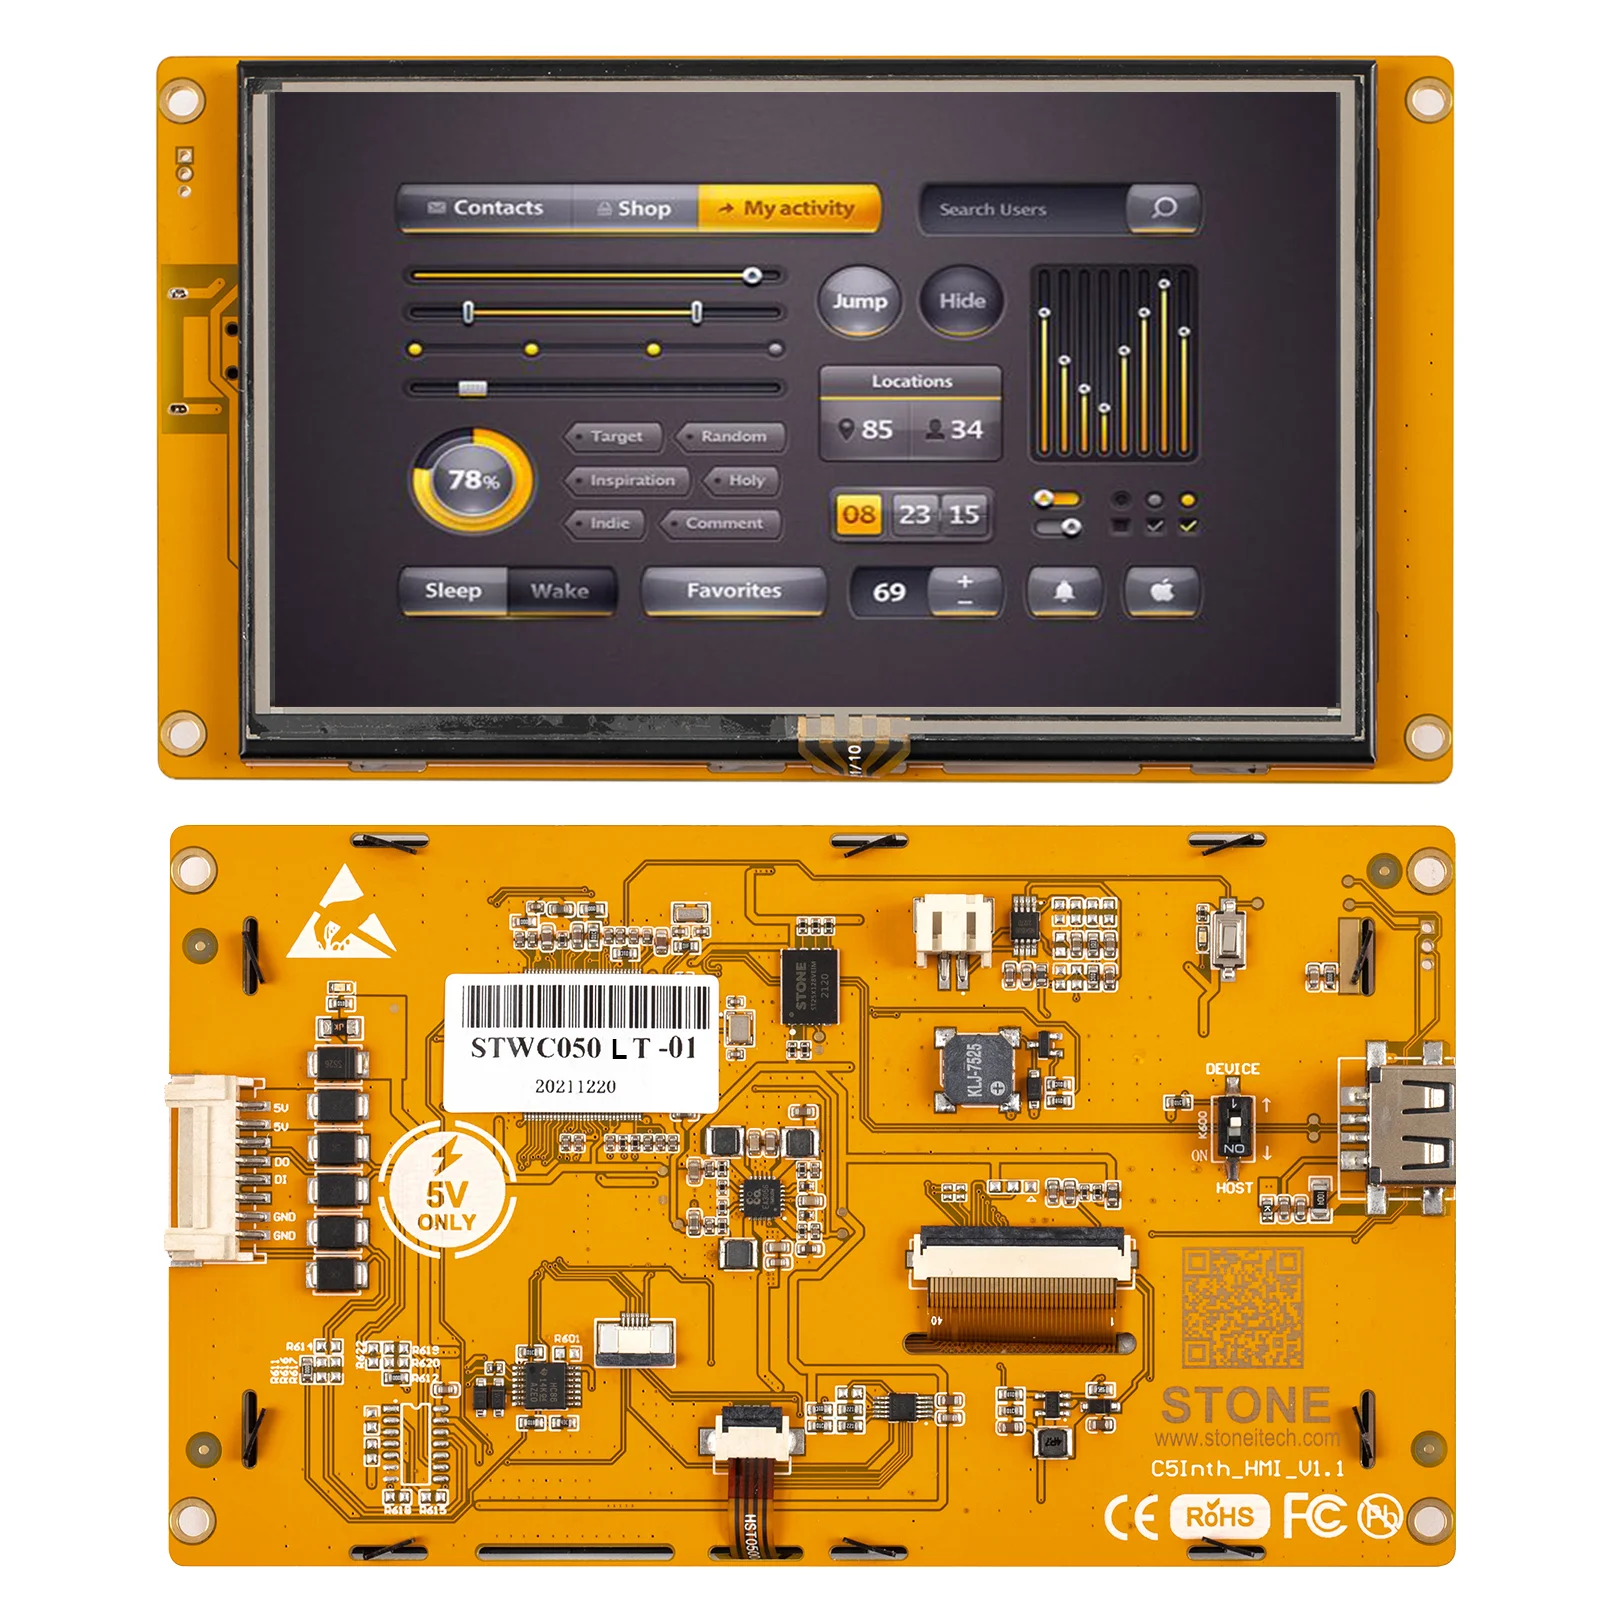 A Class Industry Panel Intelligent C Series 5.0’’ Capacitive HMI Touchscreen with Enclosure